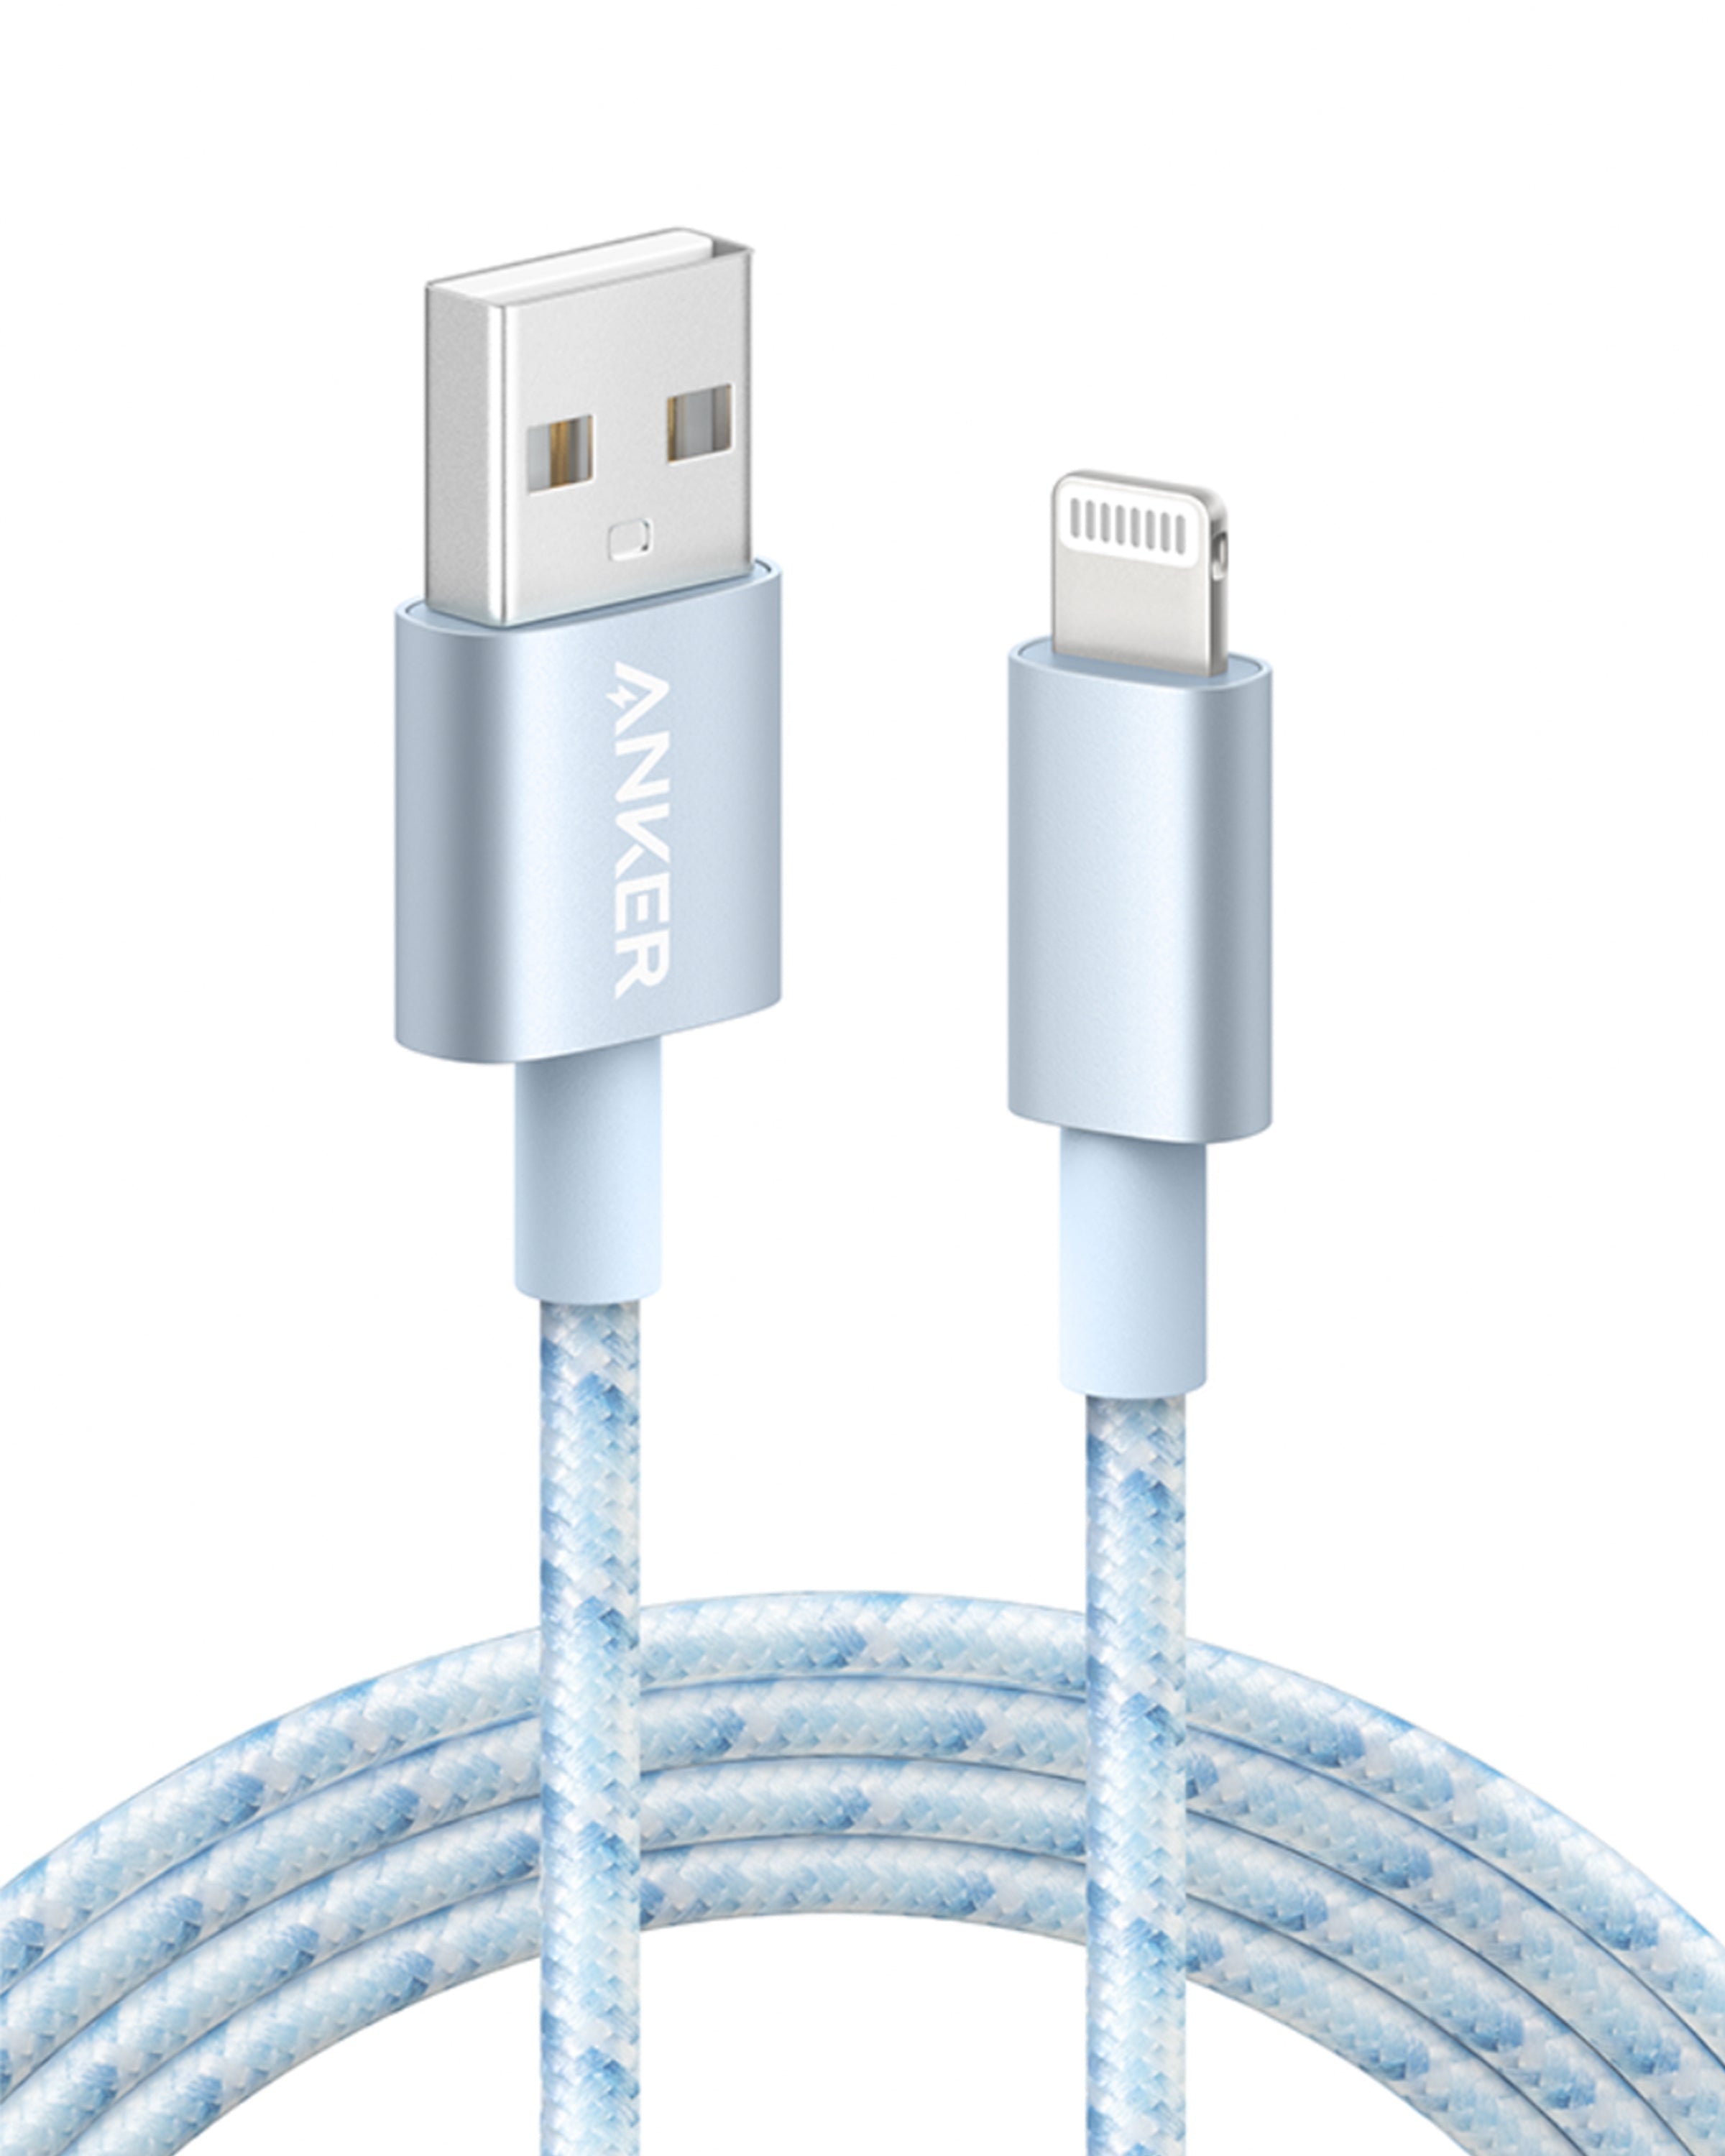 Cables - Anker US